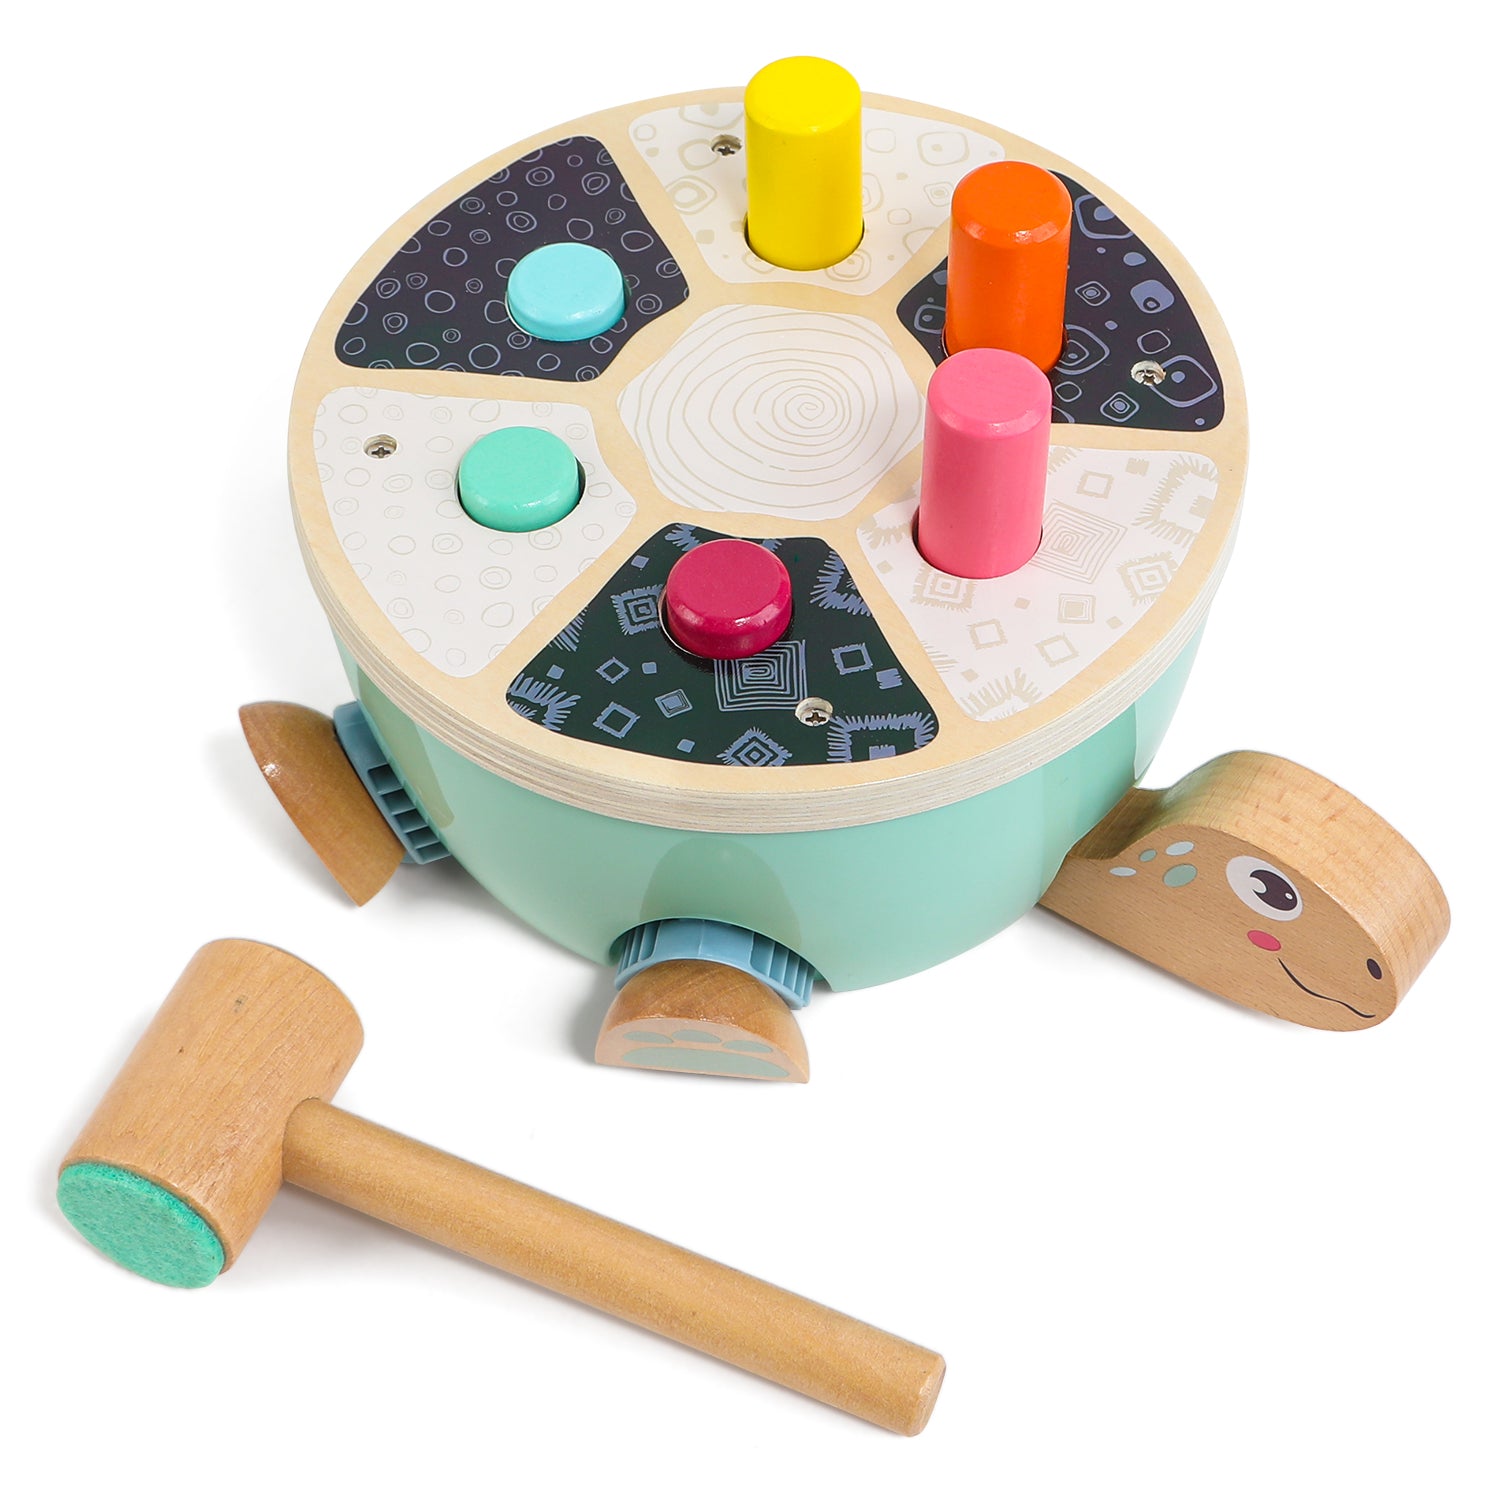 Colours and fine motor skills: When tapping with the hammer, kids train their fine motor skills, cleverness and hand-eye coordination. The colourful sticks not only encourage play, but are also ideal for learning colours.